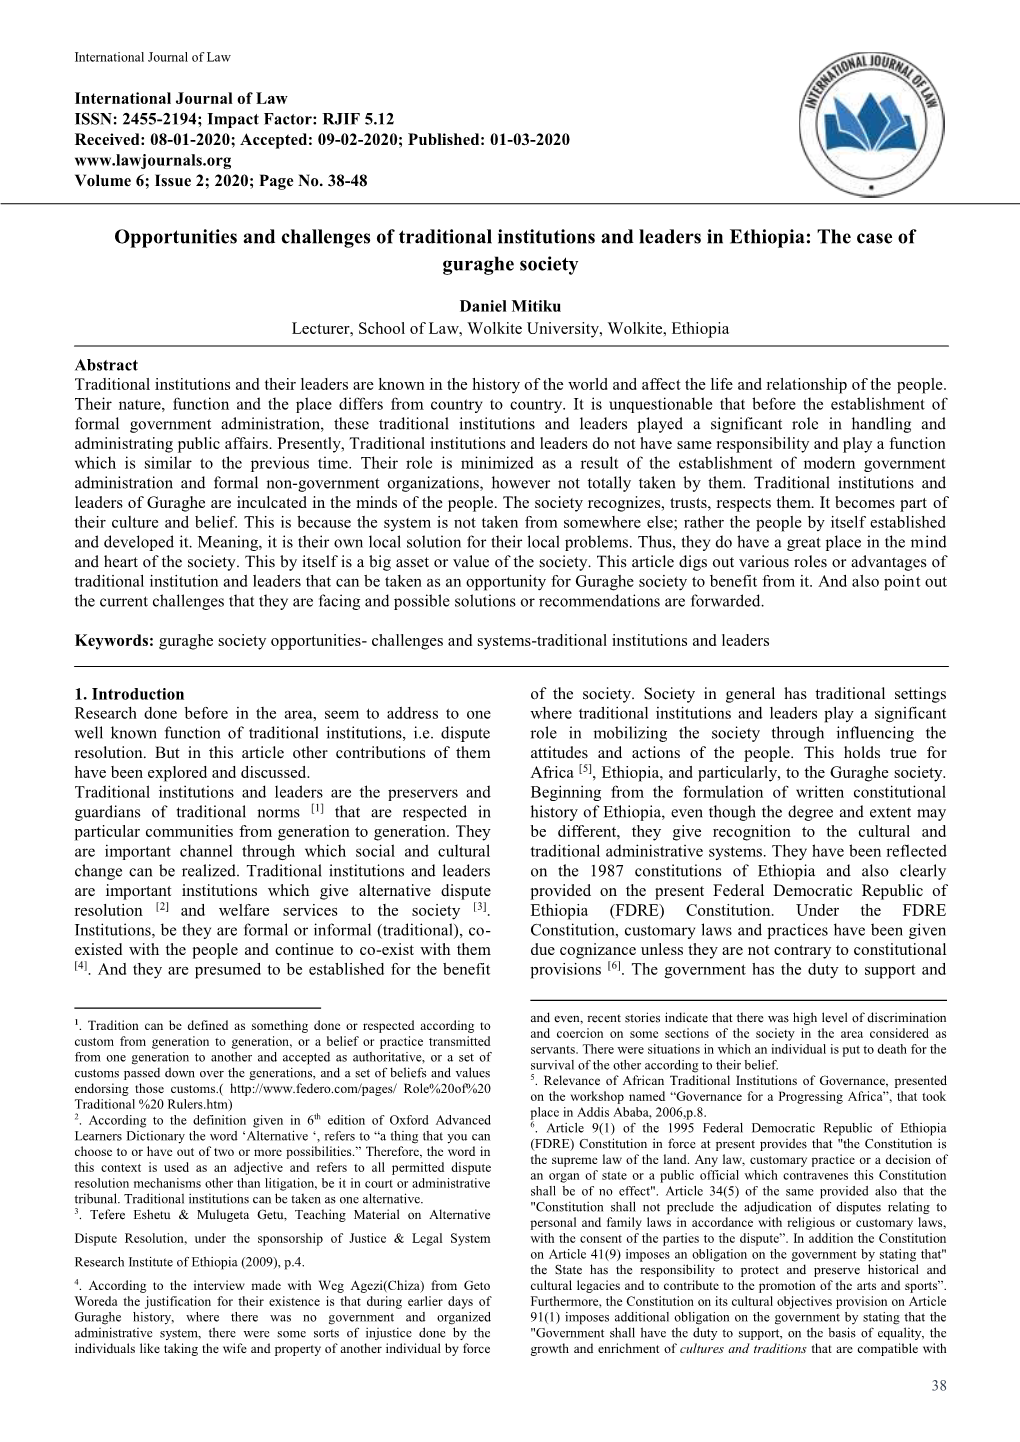 Opportunities and Challenges of Traditional Institutions and Leaders in Ethiopia: the Case of Guraghe Society